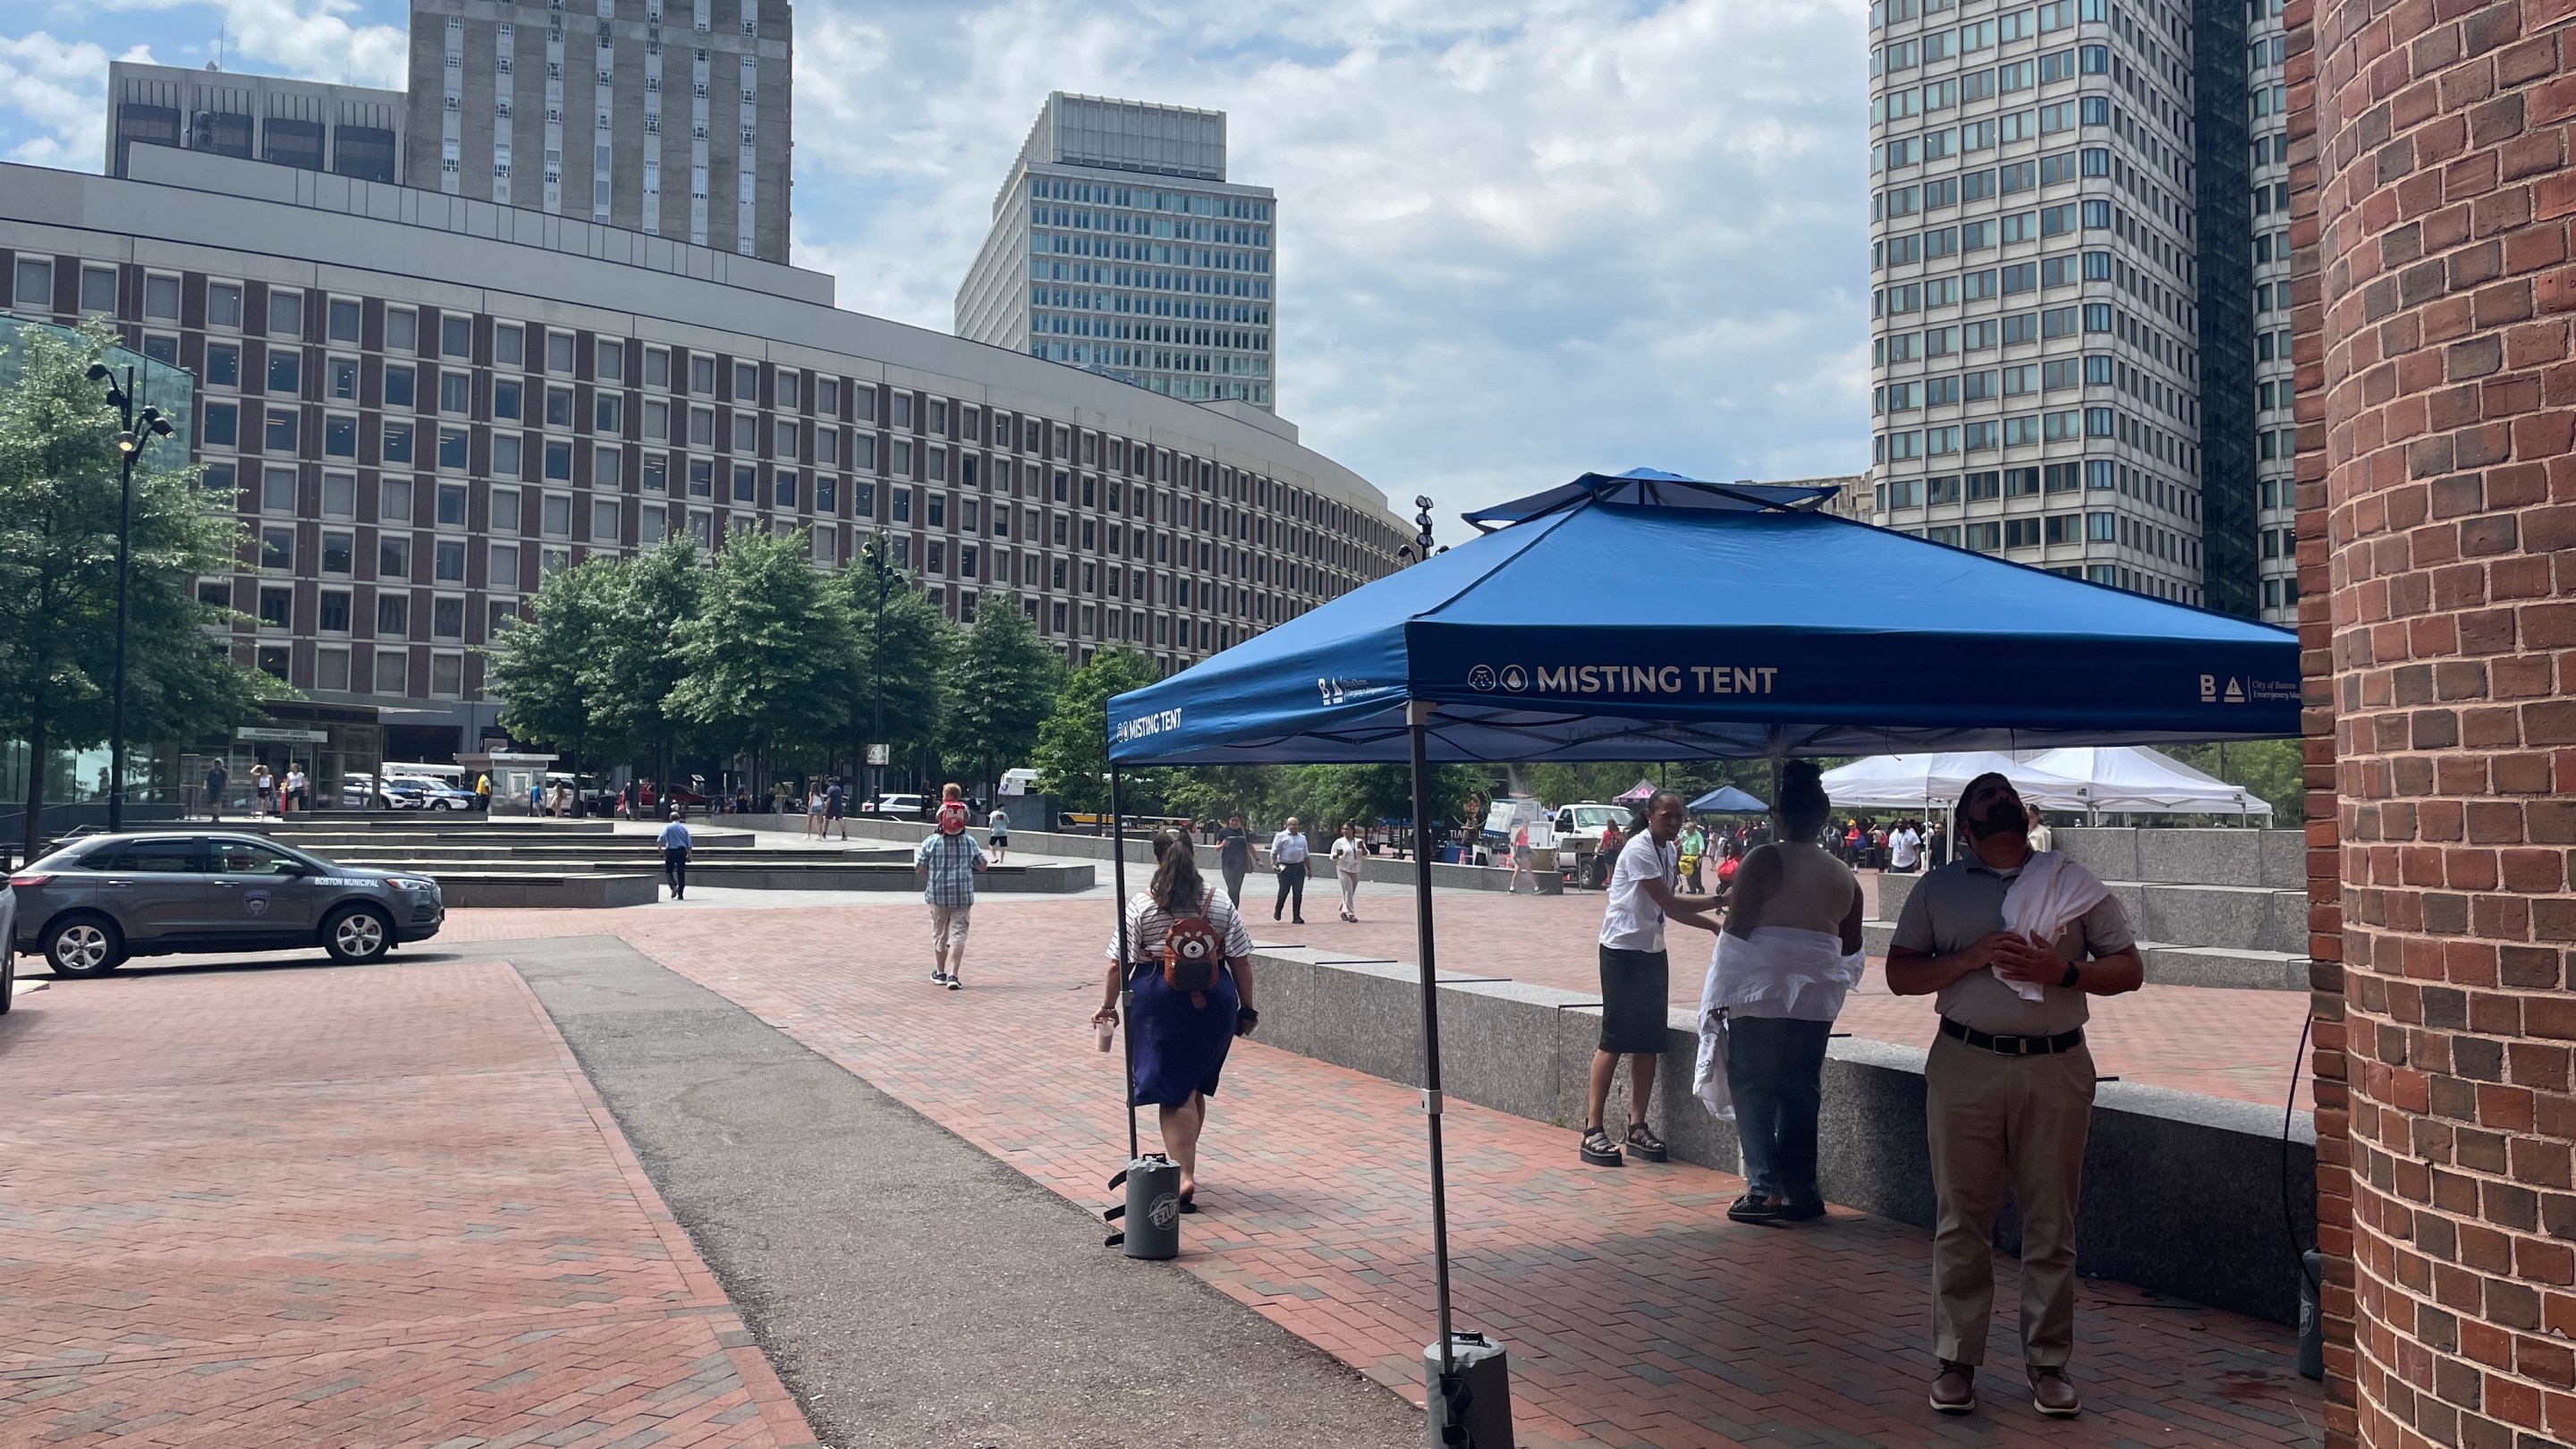 Four people gather under a blue pop-up tent labelled "misting station" on a wide open brick plaza on a sunny day, with high-rise buildings in the distance.